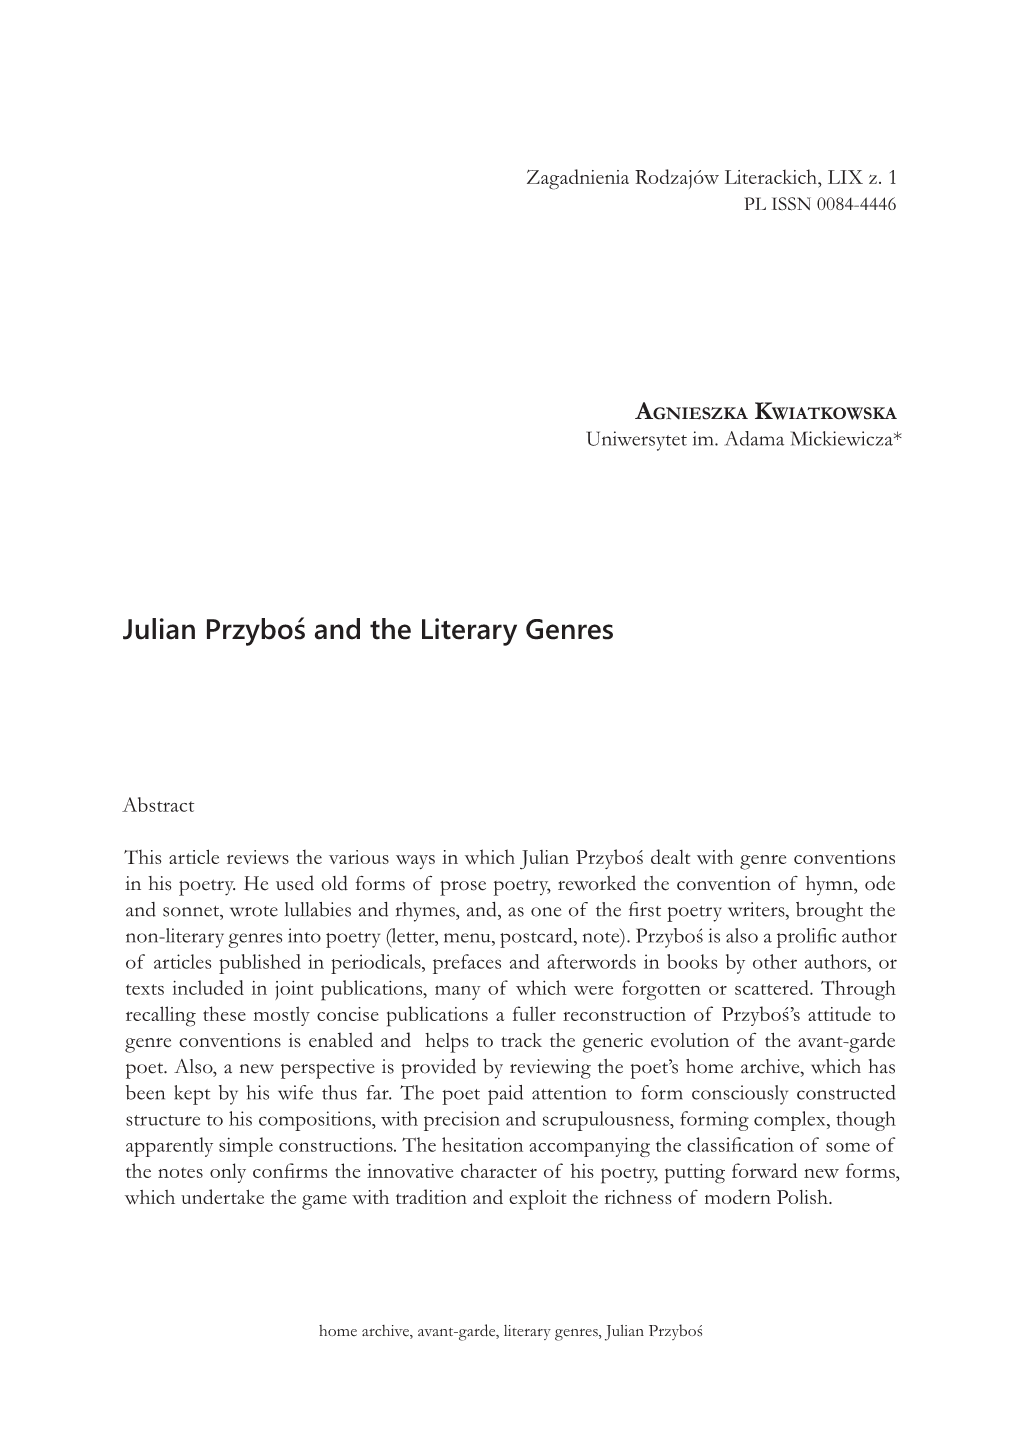 Julian Przyboś and the Literary Genres